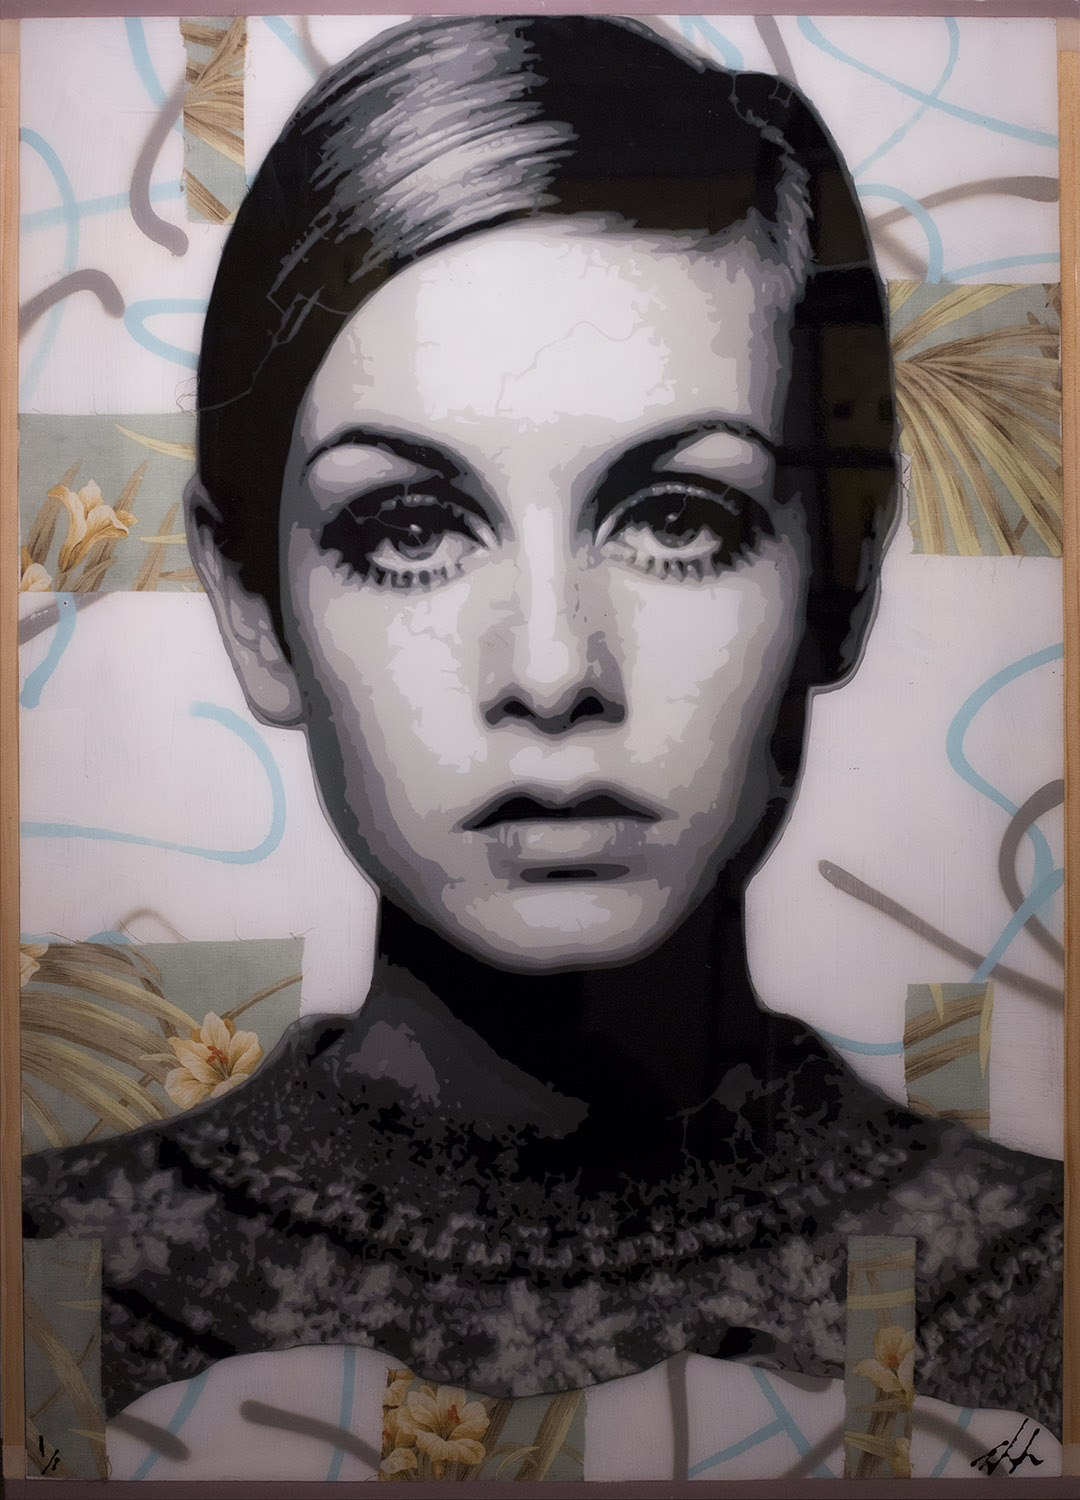 Twiggy 49.5 x 35.5 (with framing) Available at the Aspen art Gallery